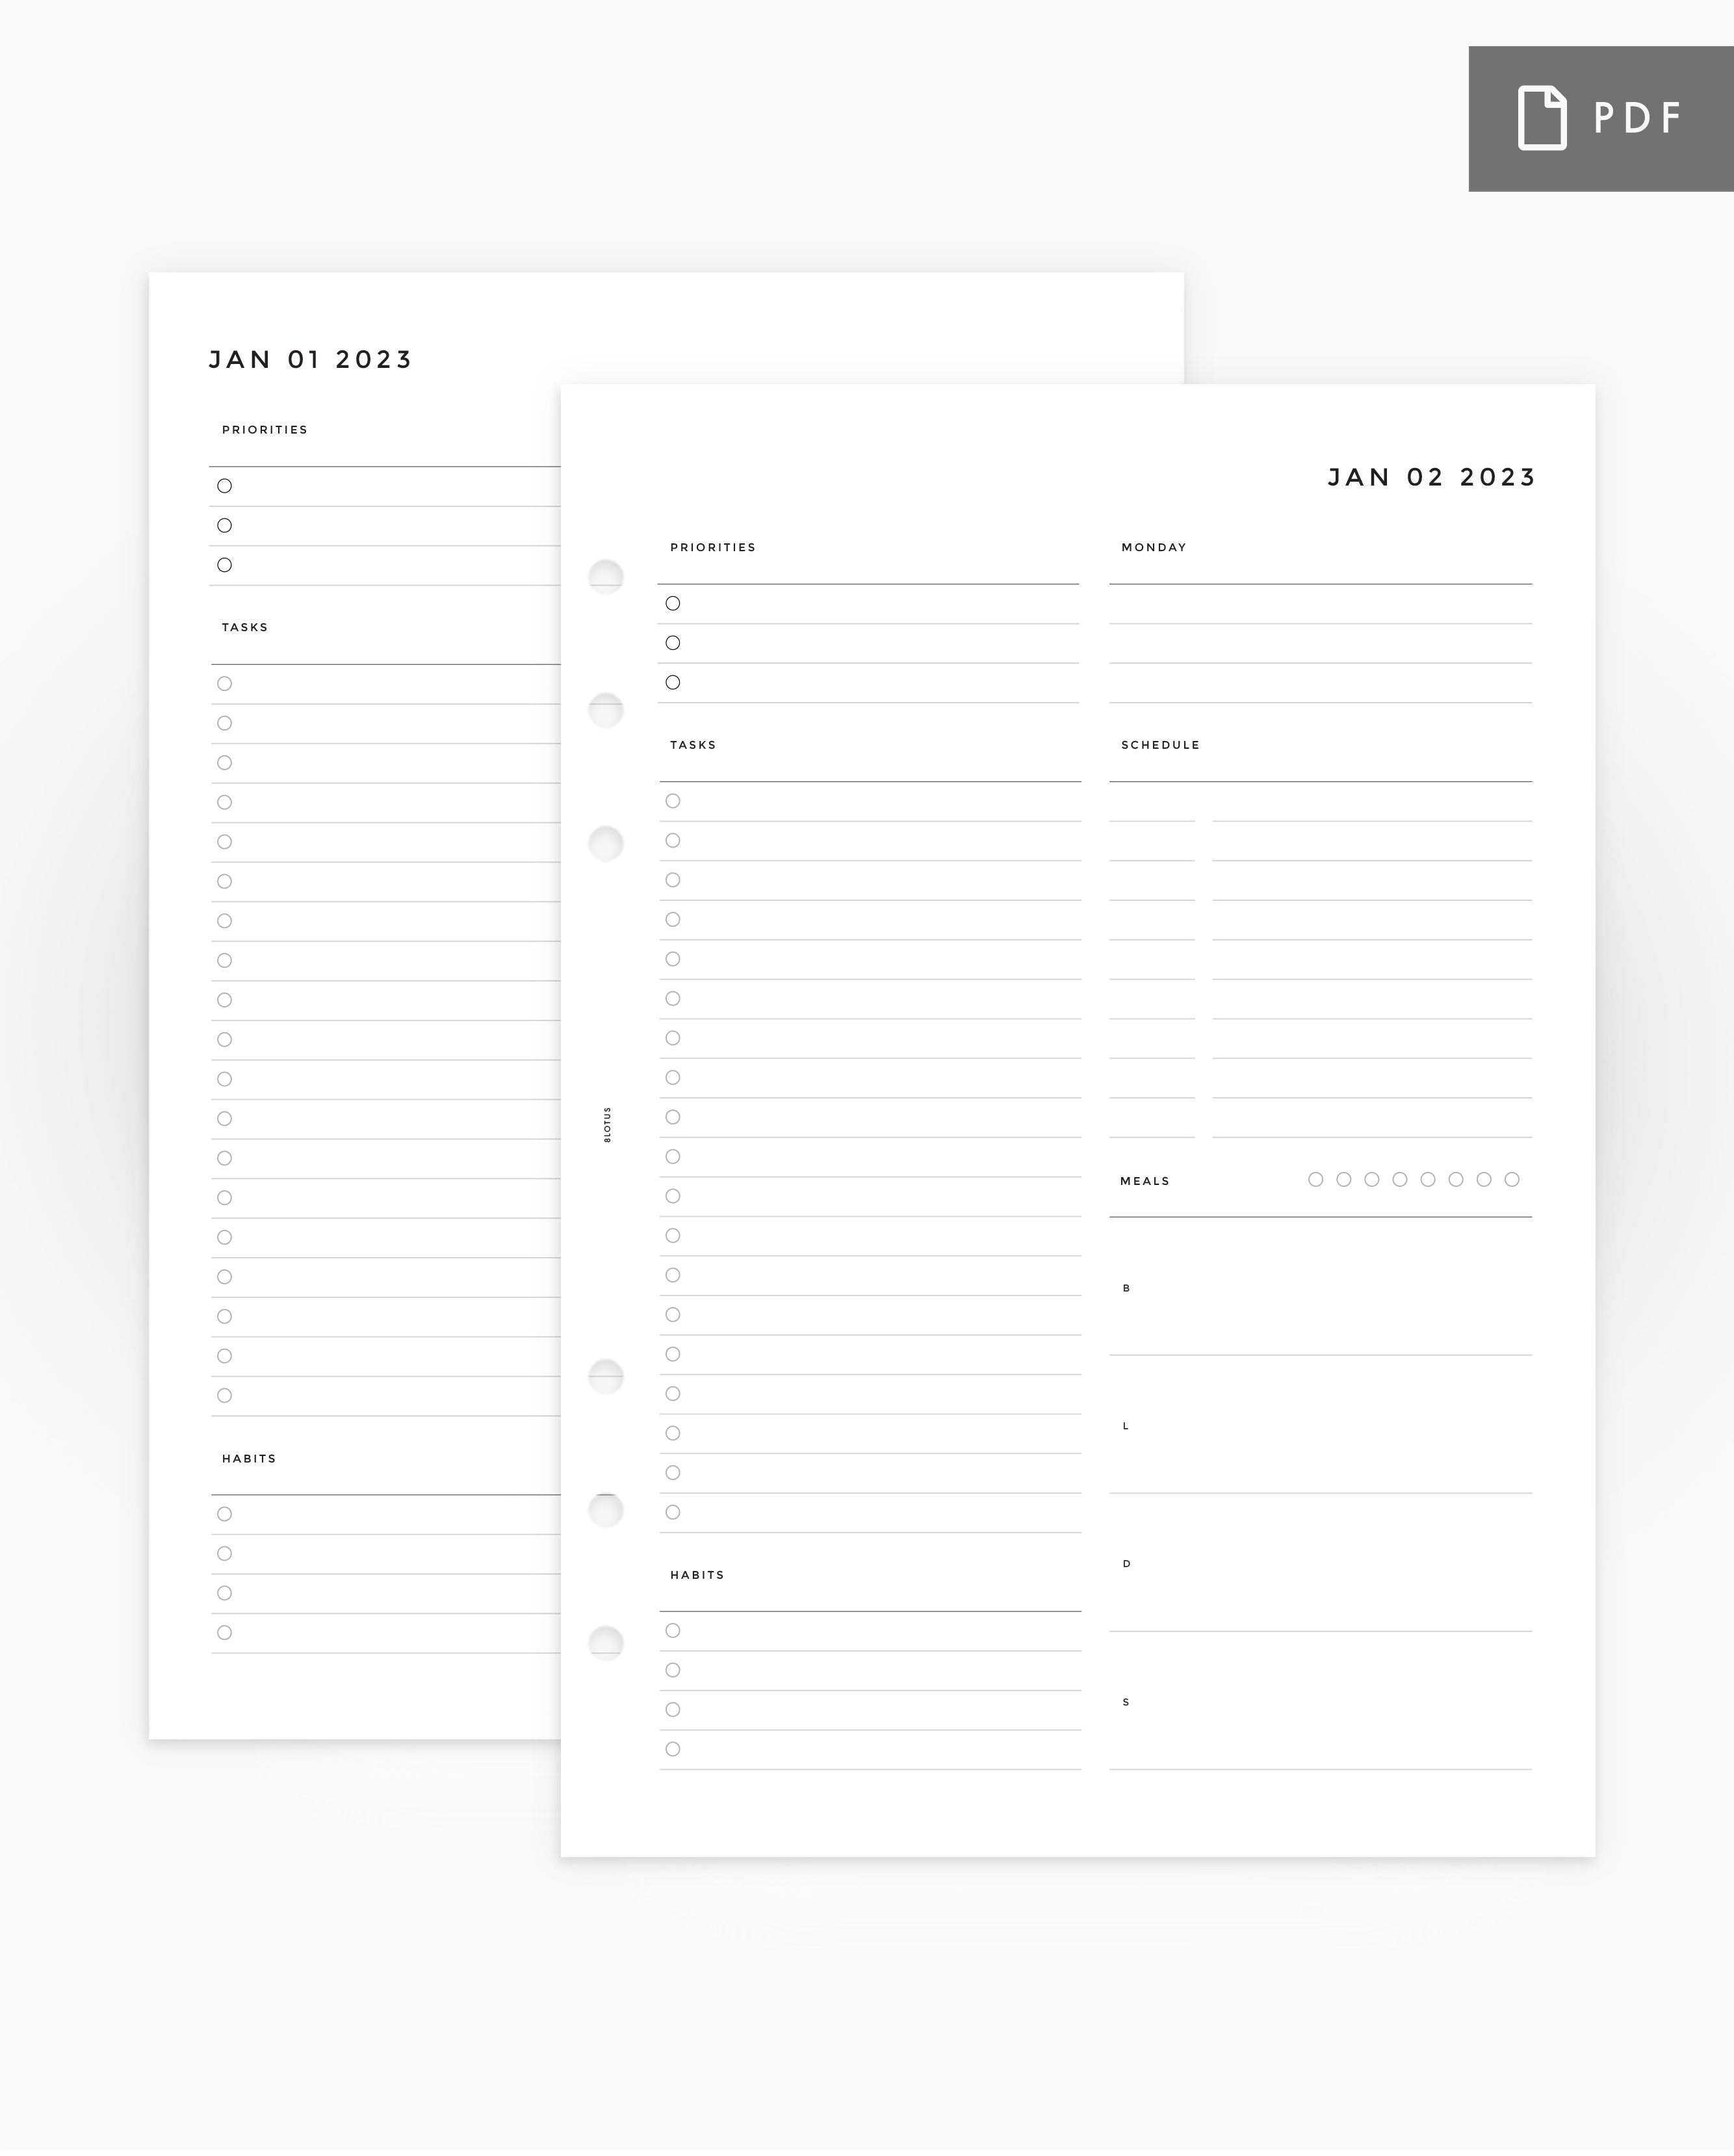 MN040 - 2023 DAILY PLANNER - DO1P - PDF